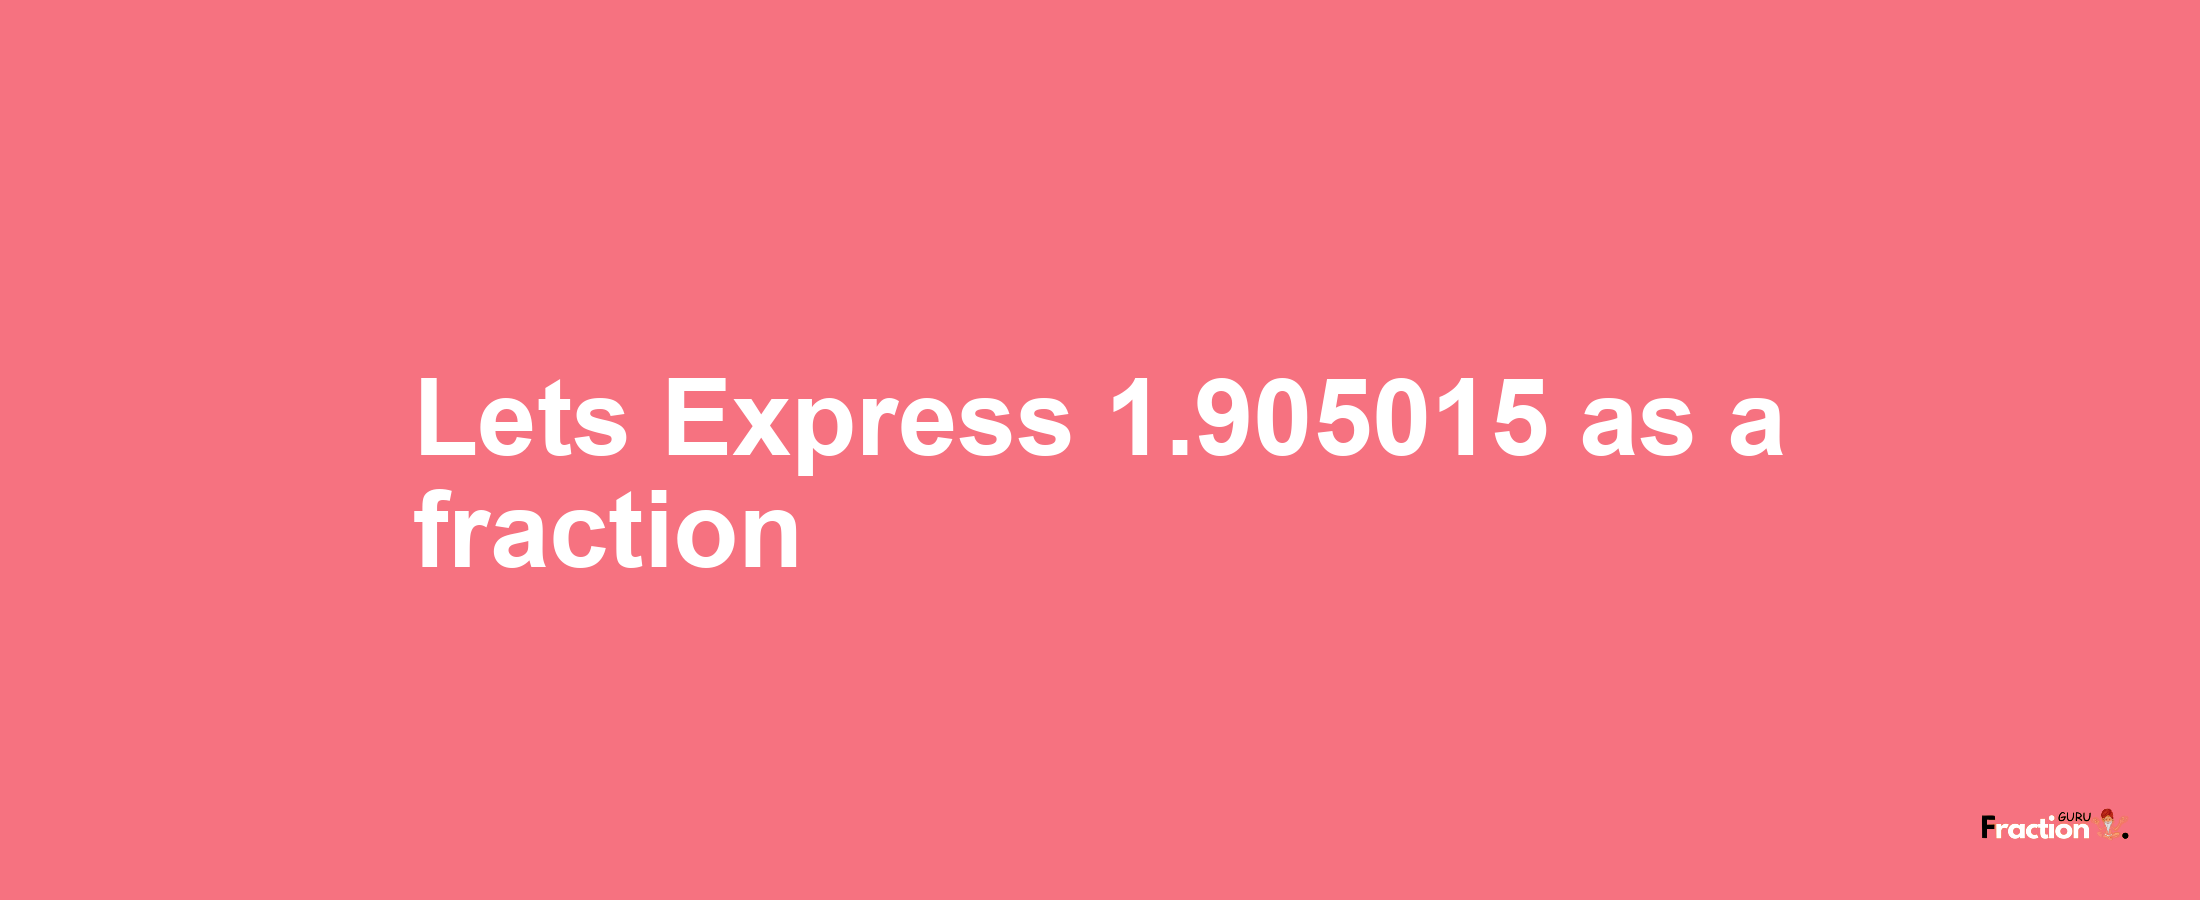 Lets Express 1.905015 as afraction